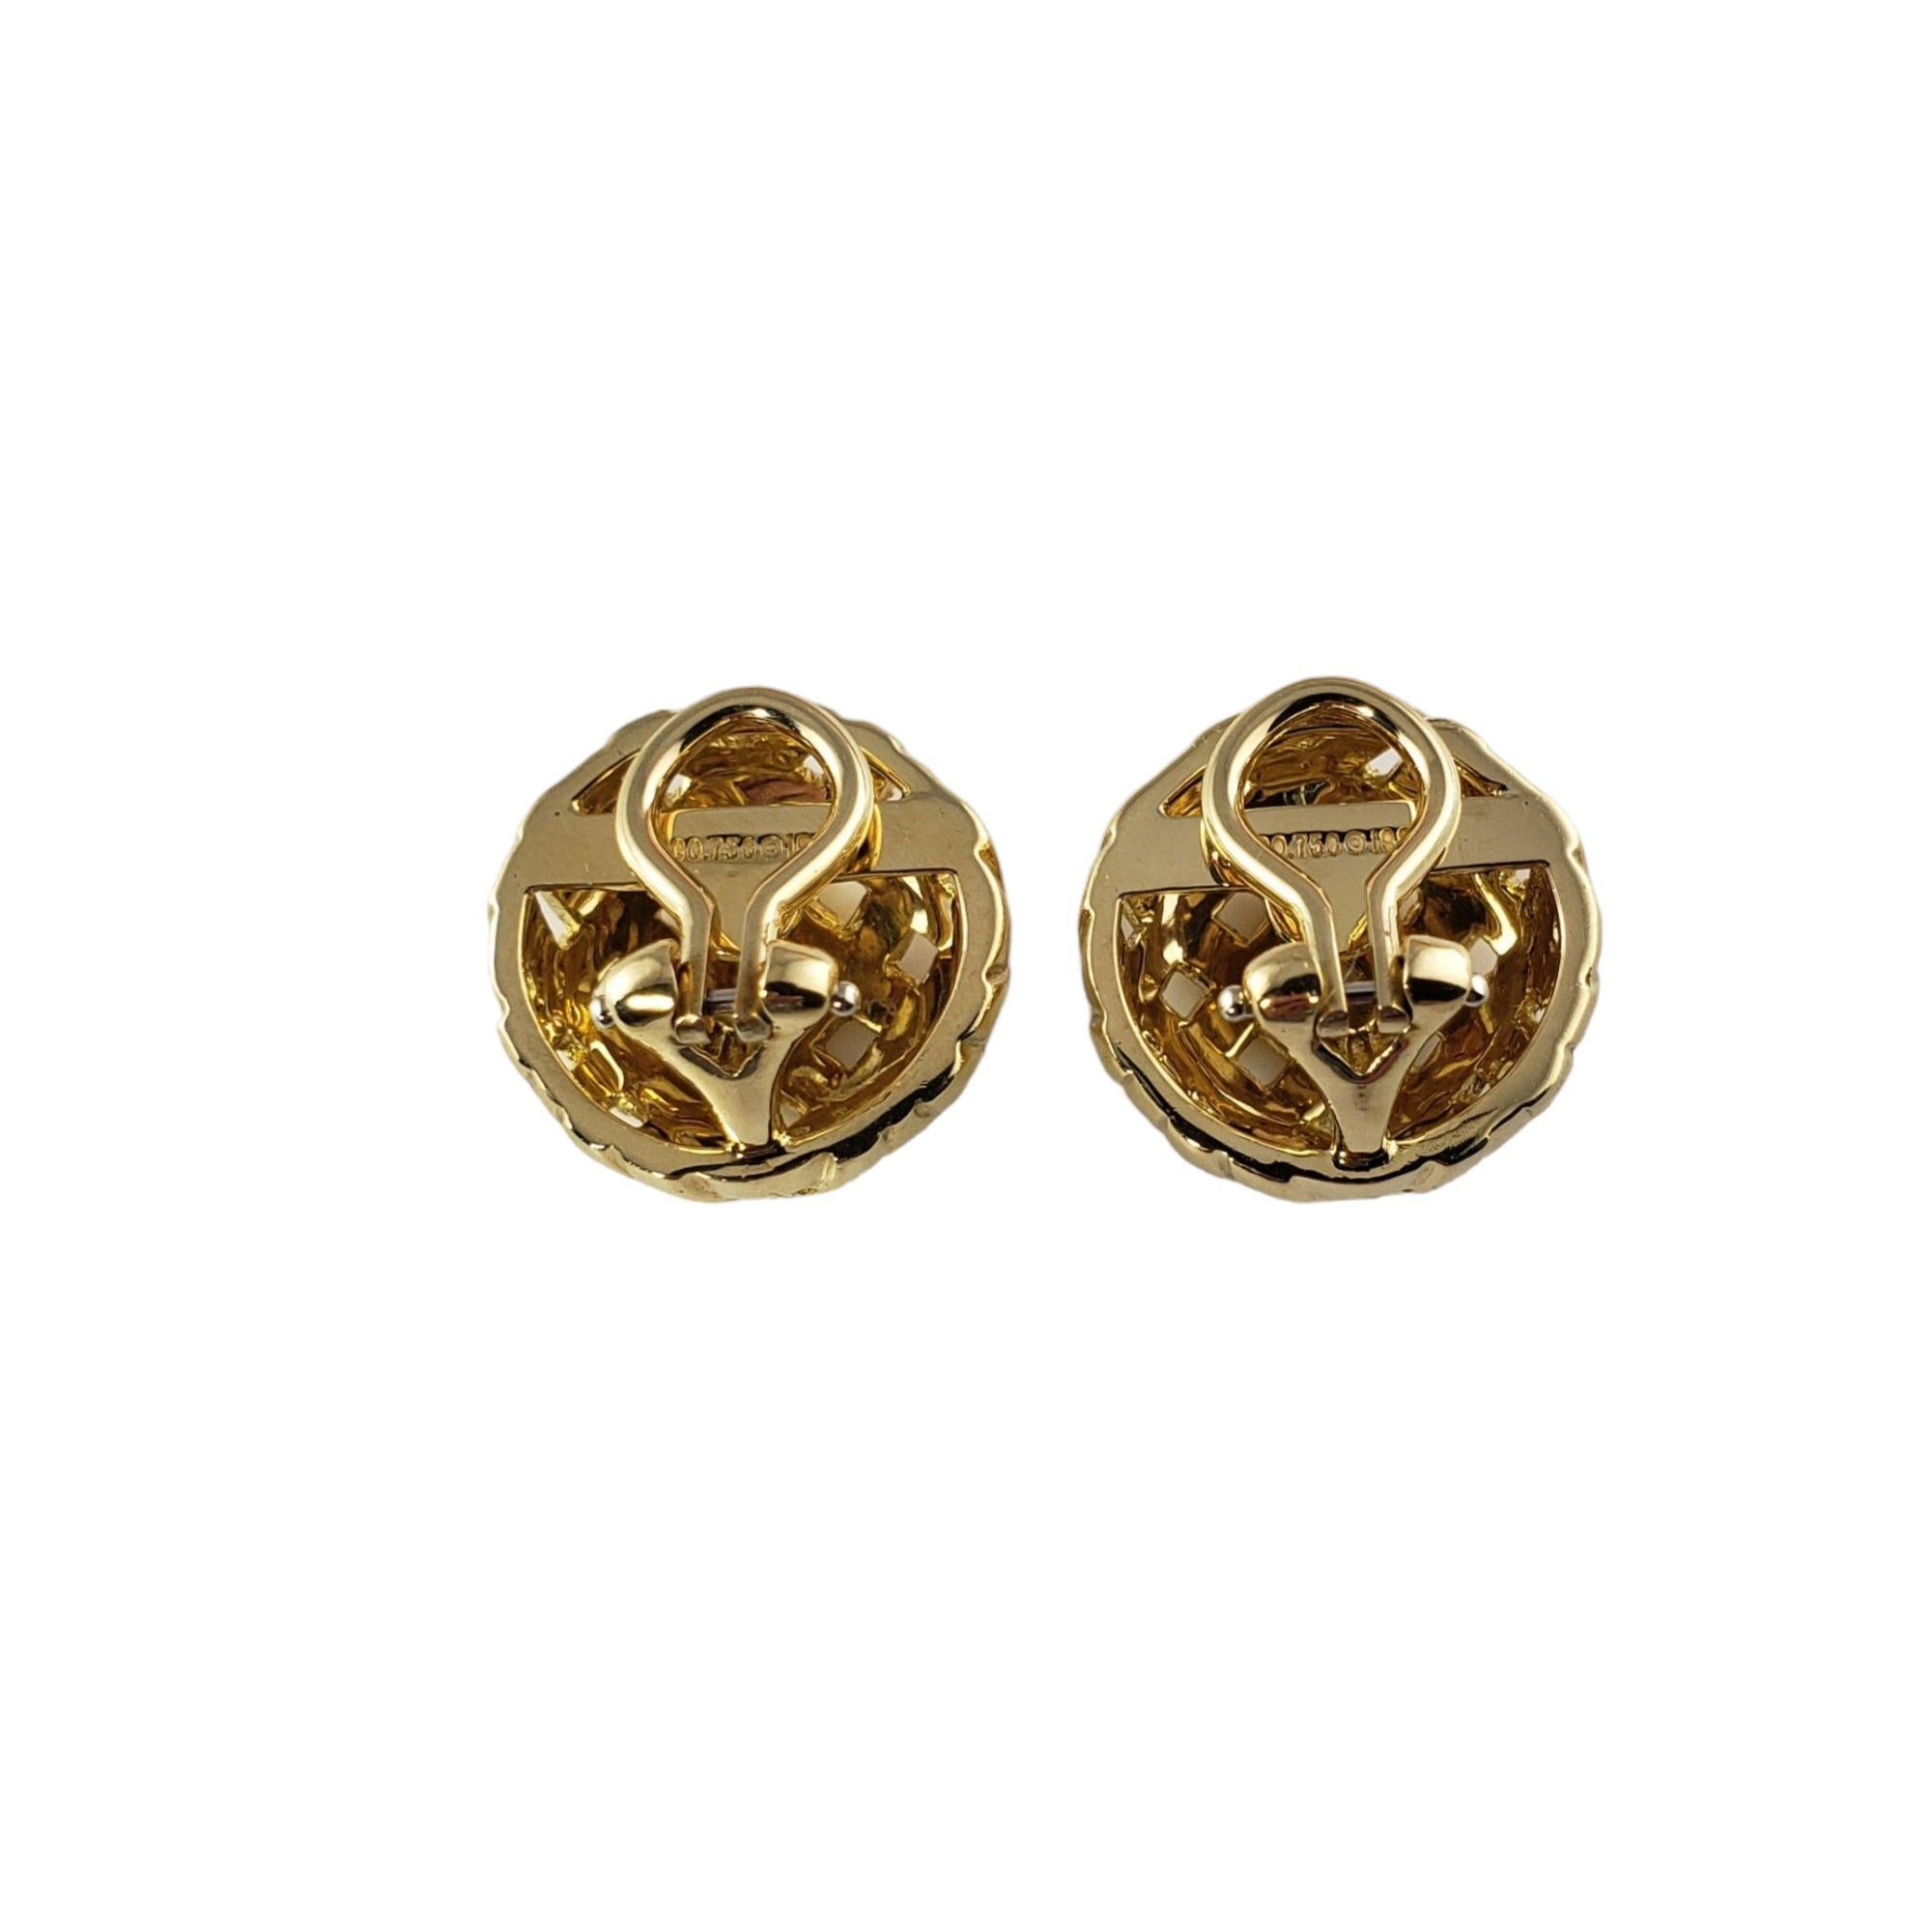 Vintage Tiffany & Co. 18 Karat Yellow Gold Clip On Earrings-

These elegant clip on earrings from Tiffany & Co. are crafted in beautifully detailed 18K yellow gold.

Size: 15 mm

Weight: 9.0 gr./ 5.8 dwt.

Hallmark: T & Co. 

Very good condition,